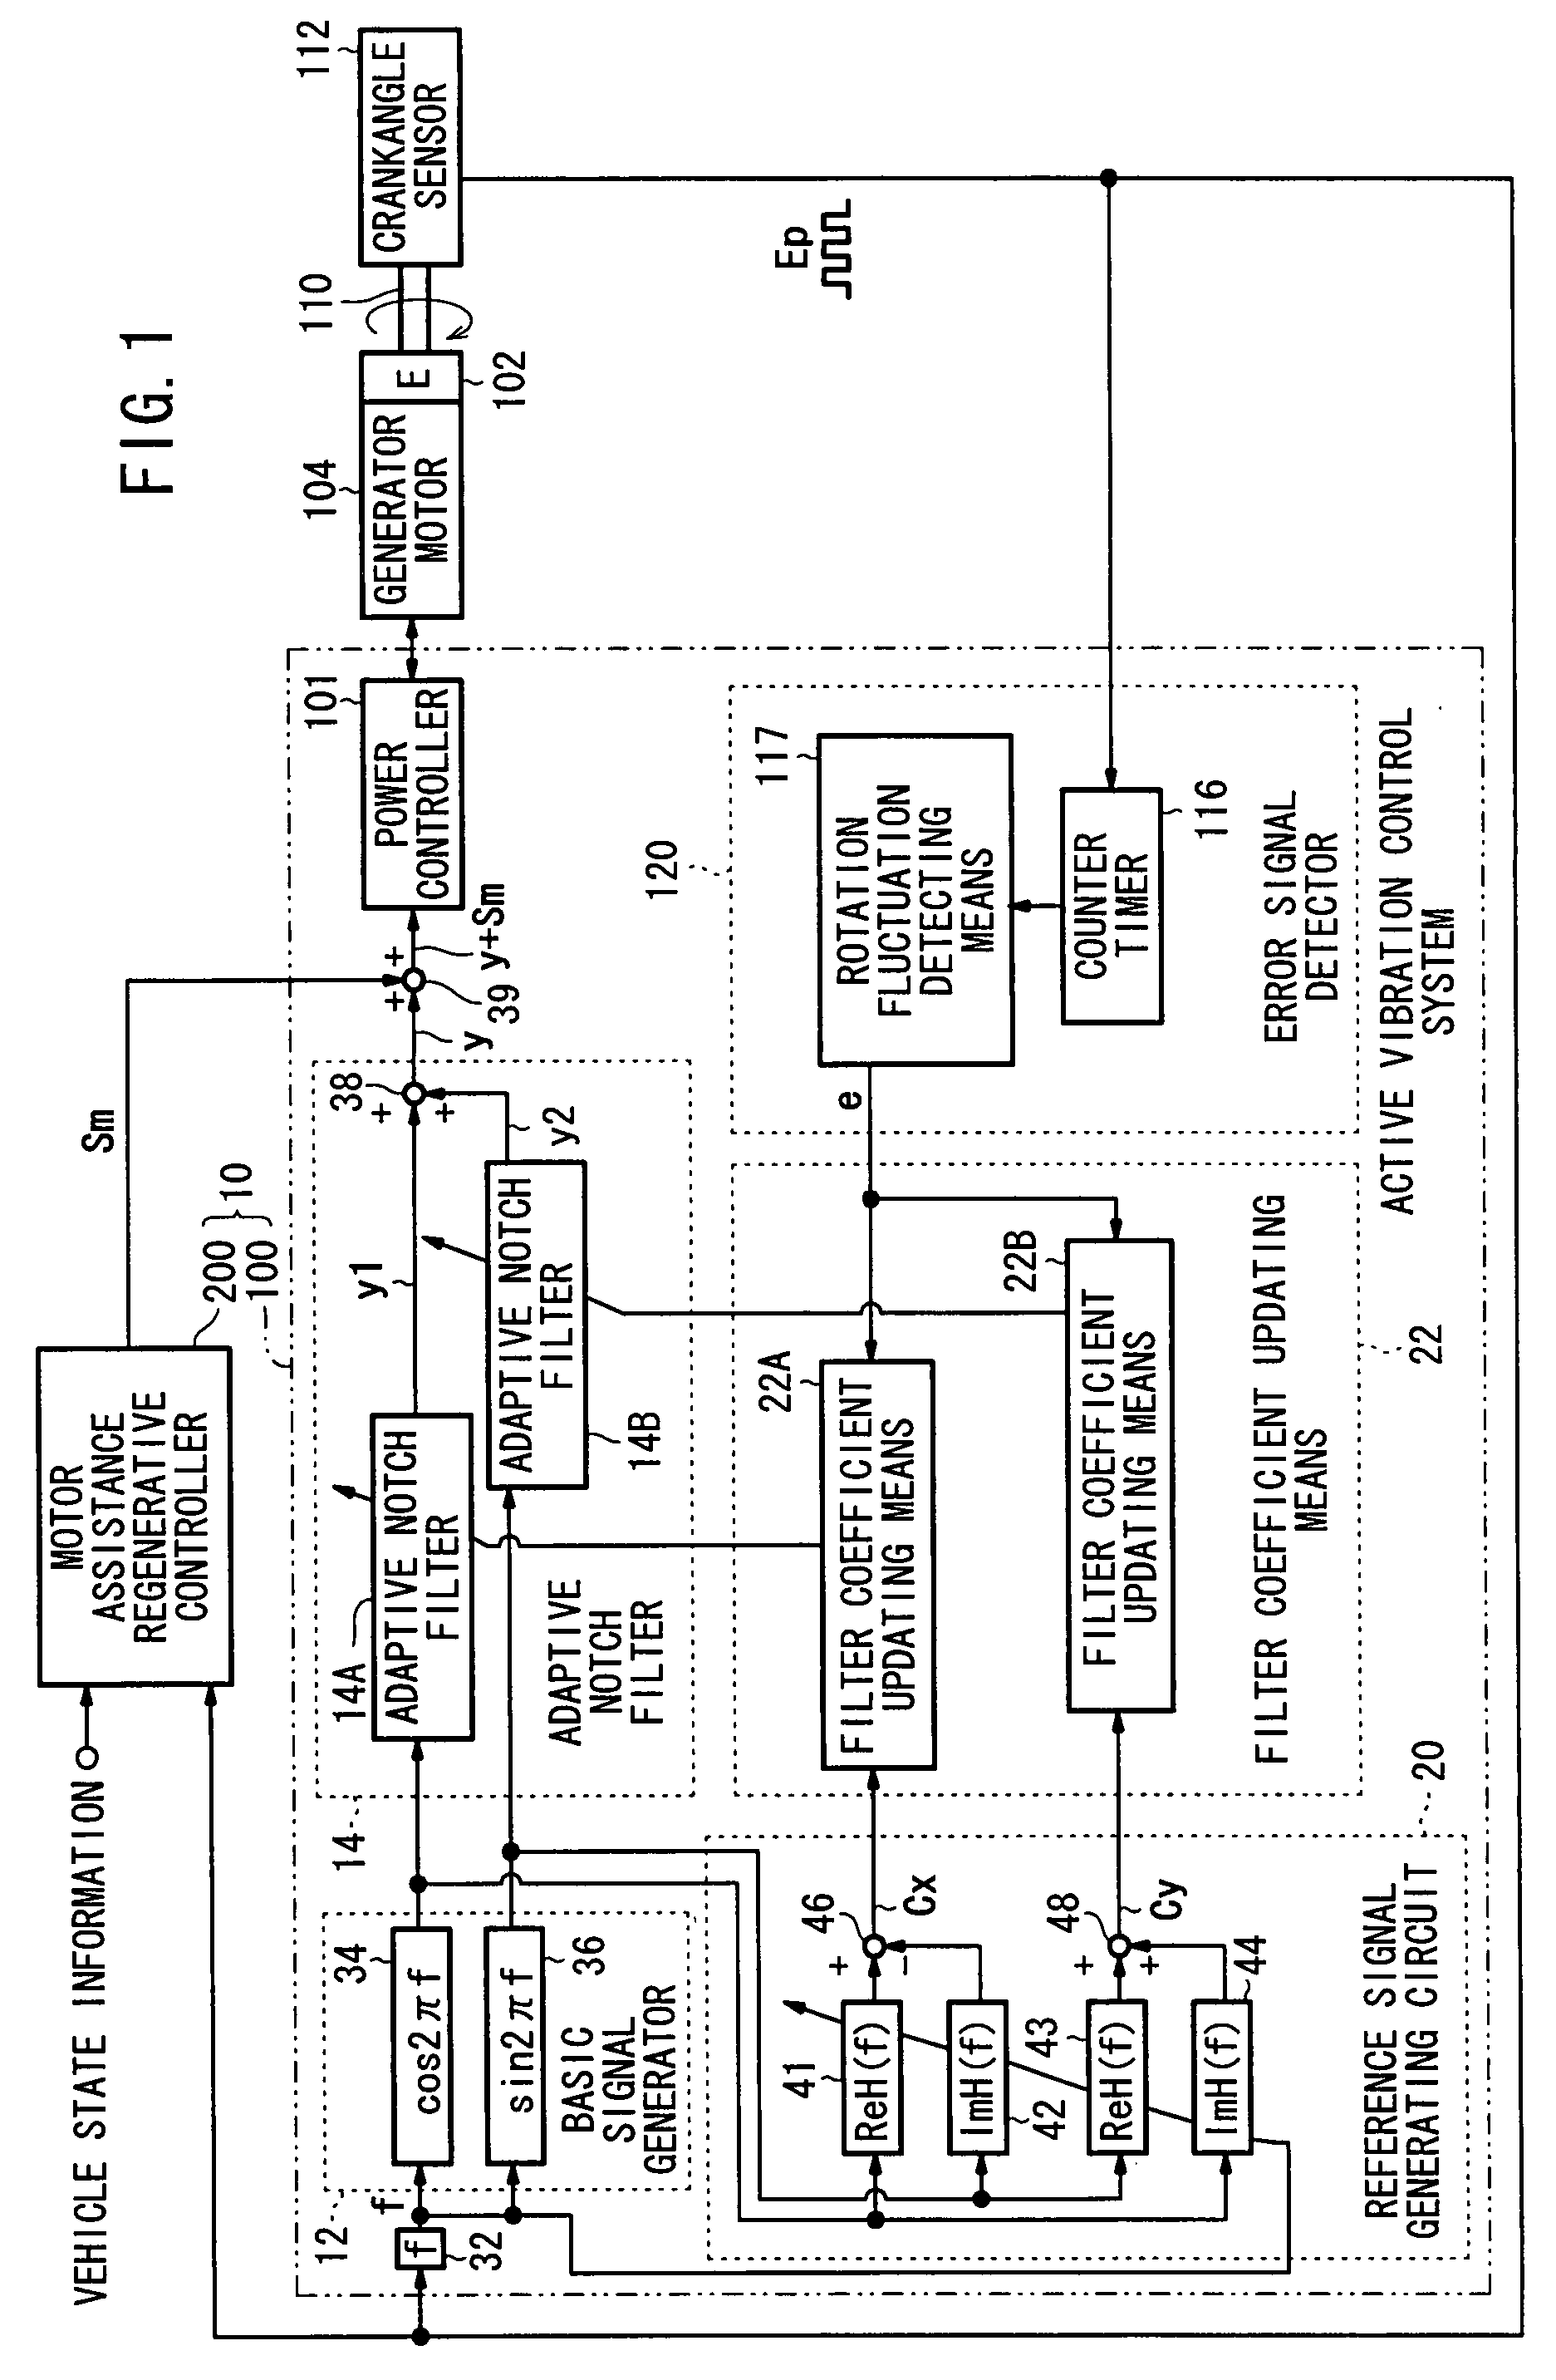 Active vibration control system for hybrid vehicle